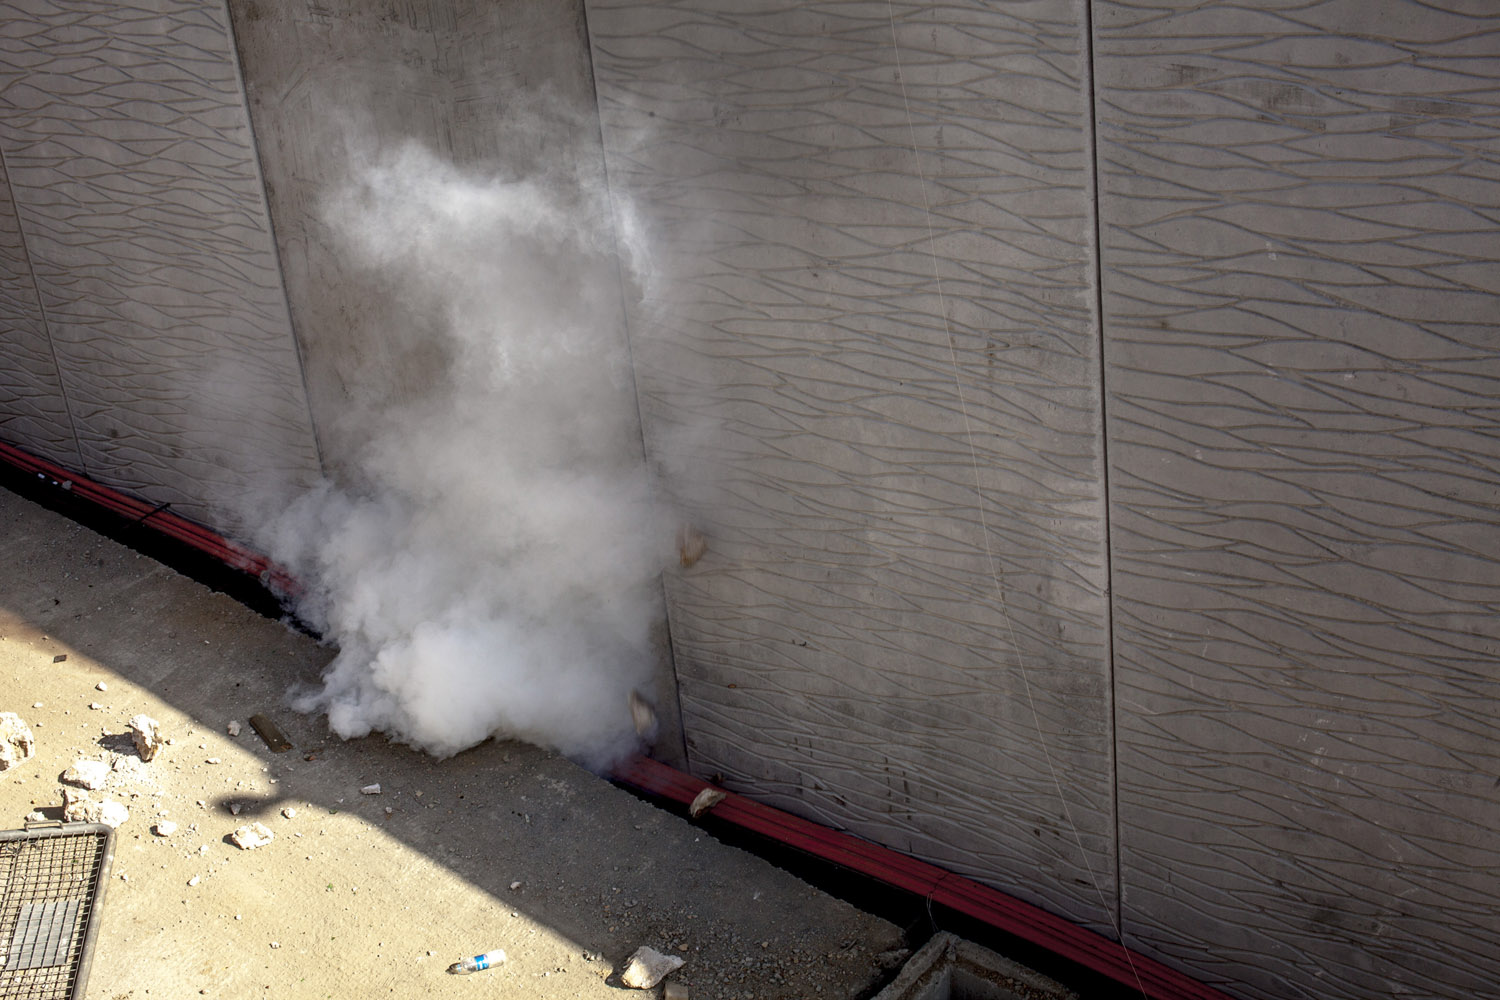 A tear gas round lands in the construction site of the proposed mall, mosque and shopping complex in the Gezi Park area of Istanbul.